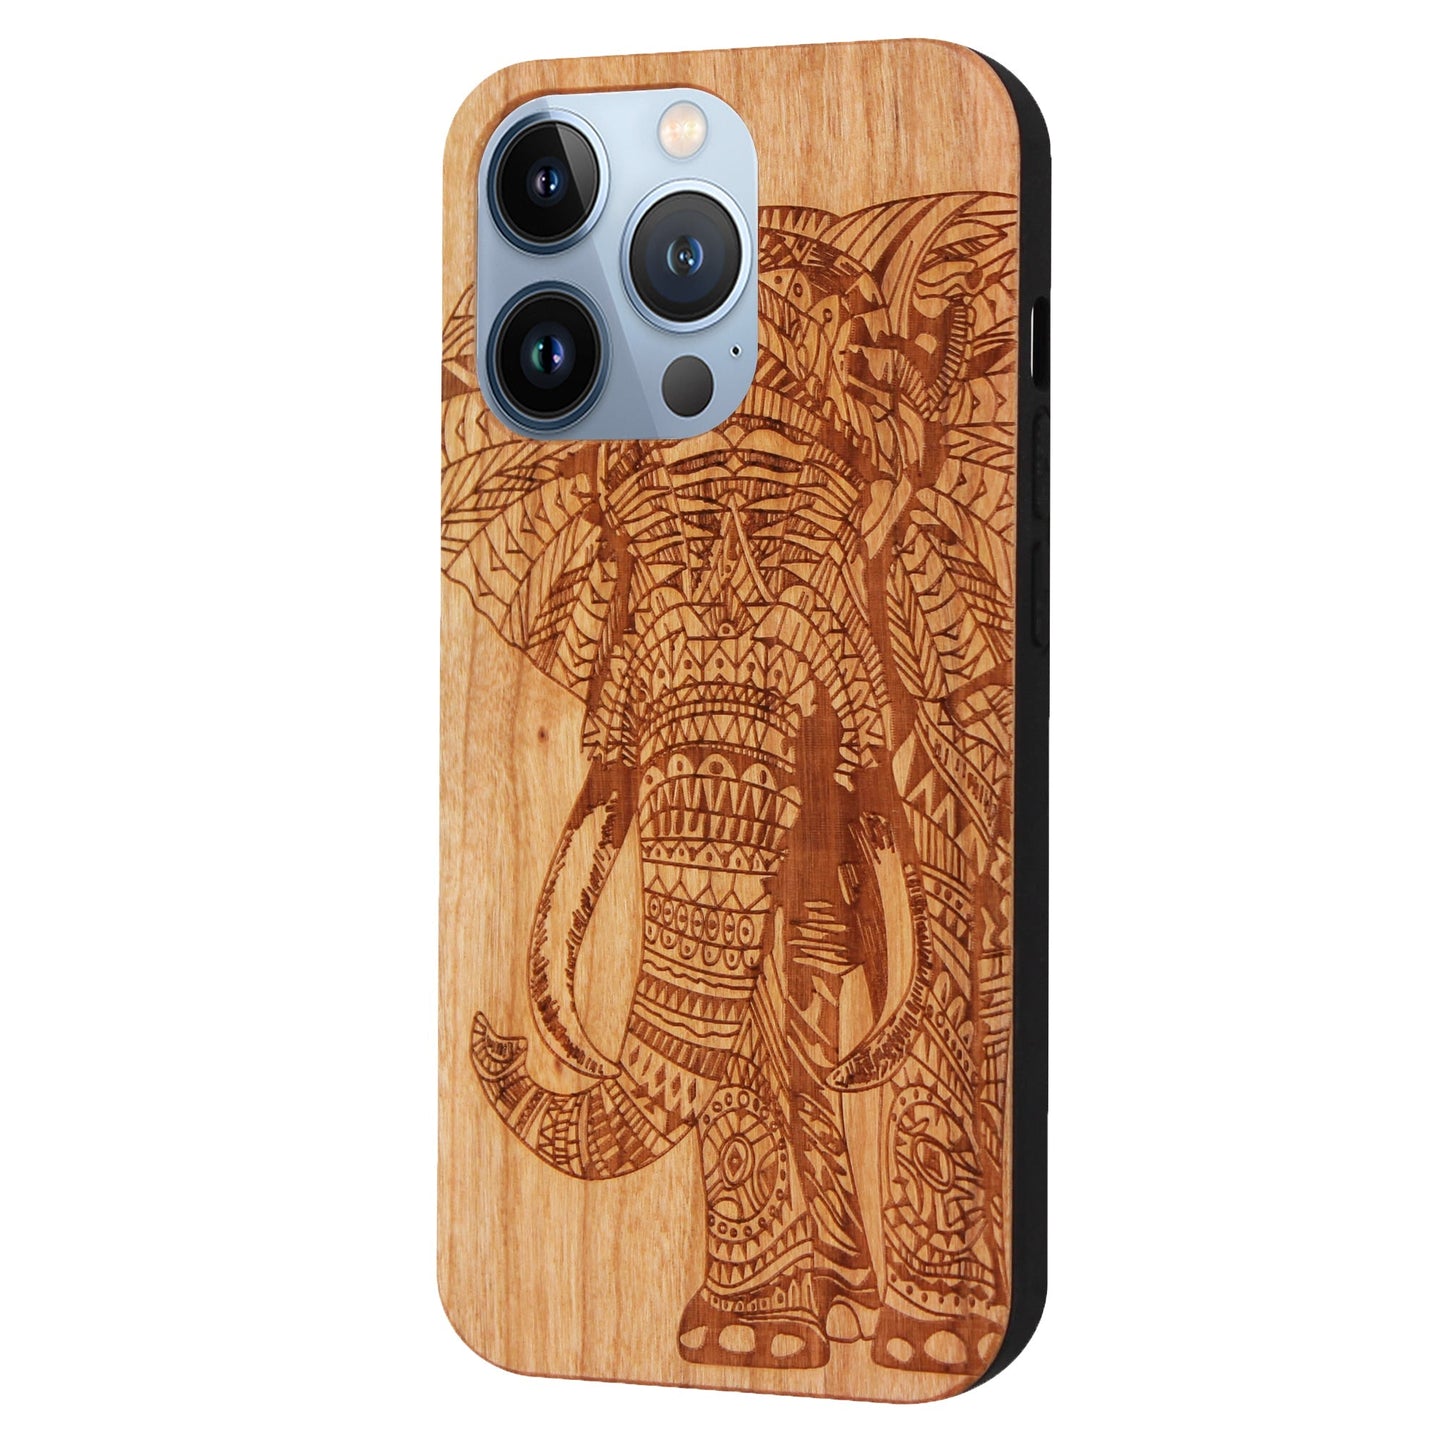 Elephant Eden case made of cherry wood for iPhone 13 Pro